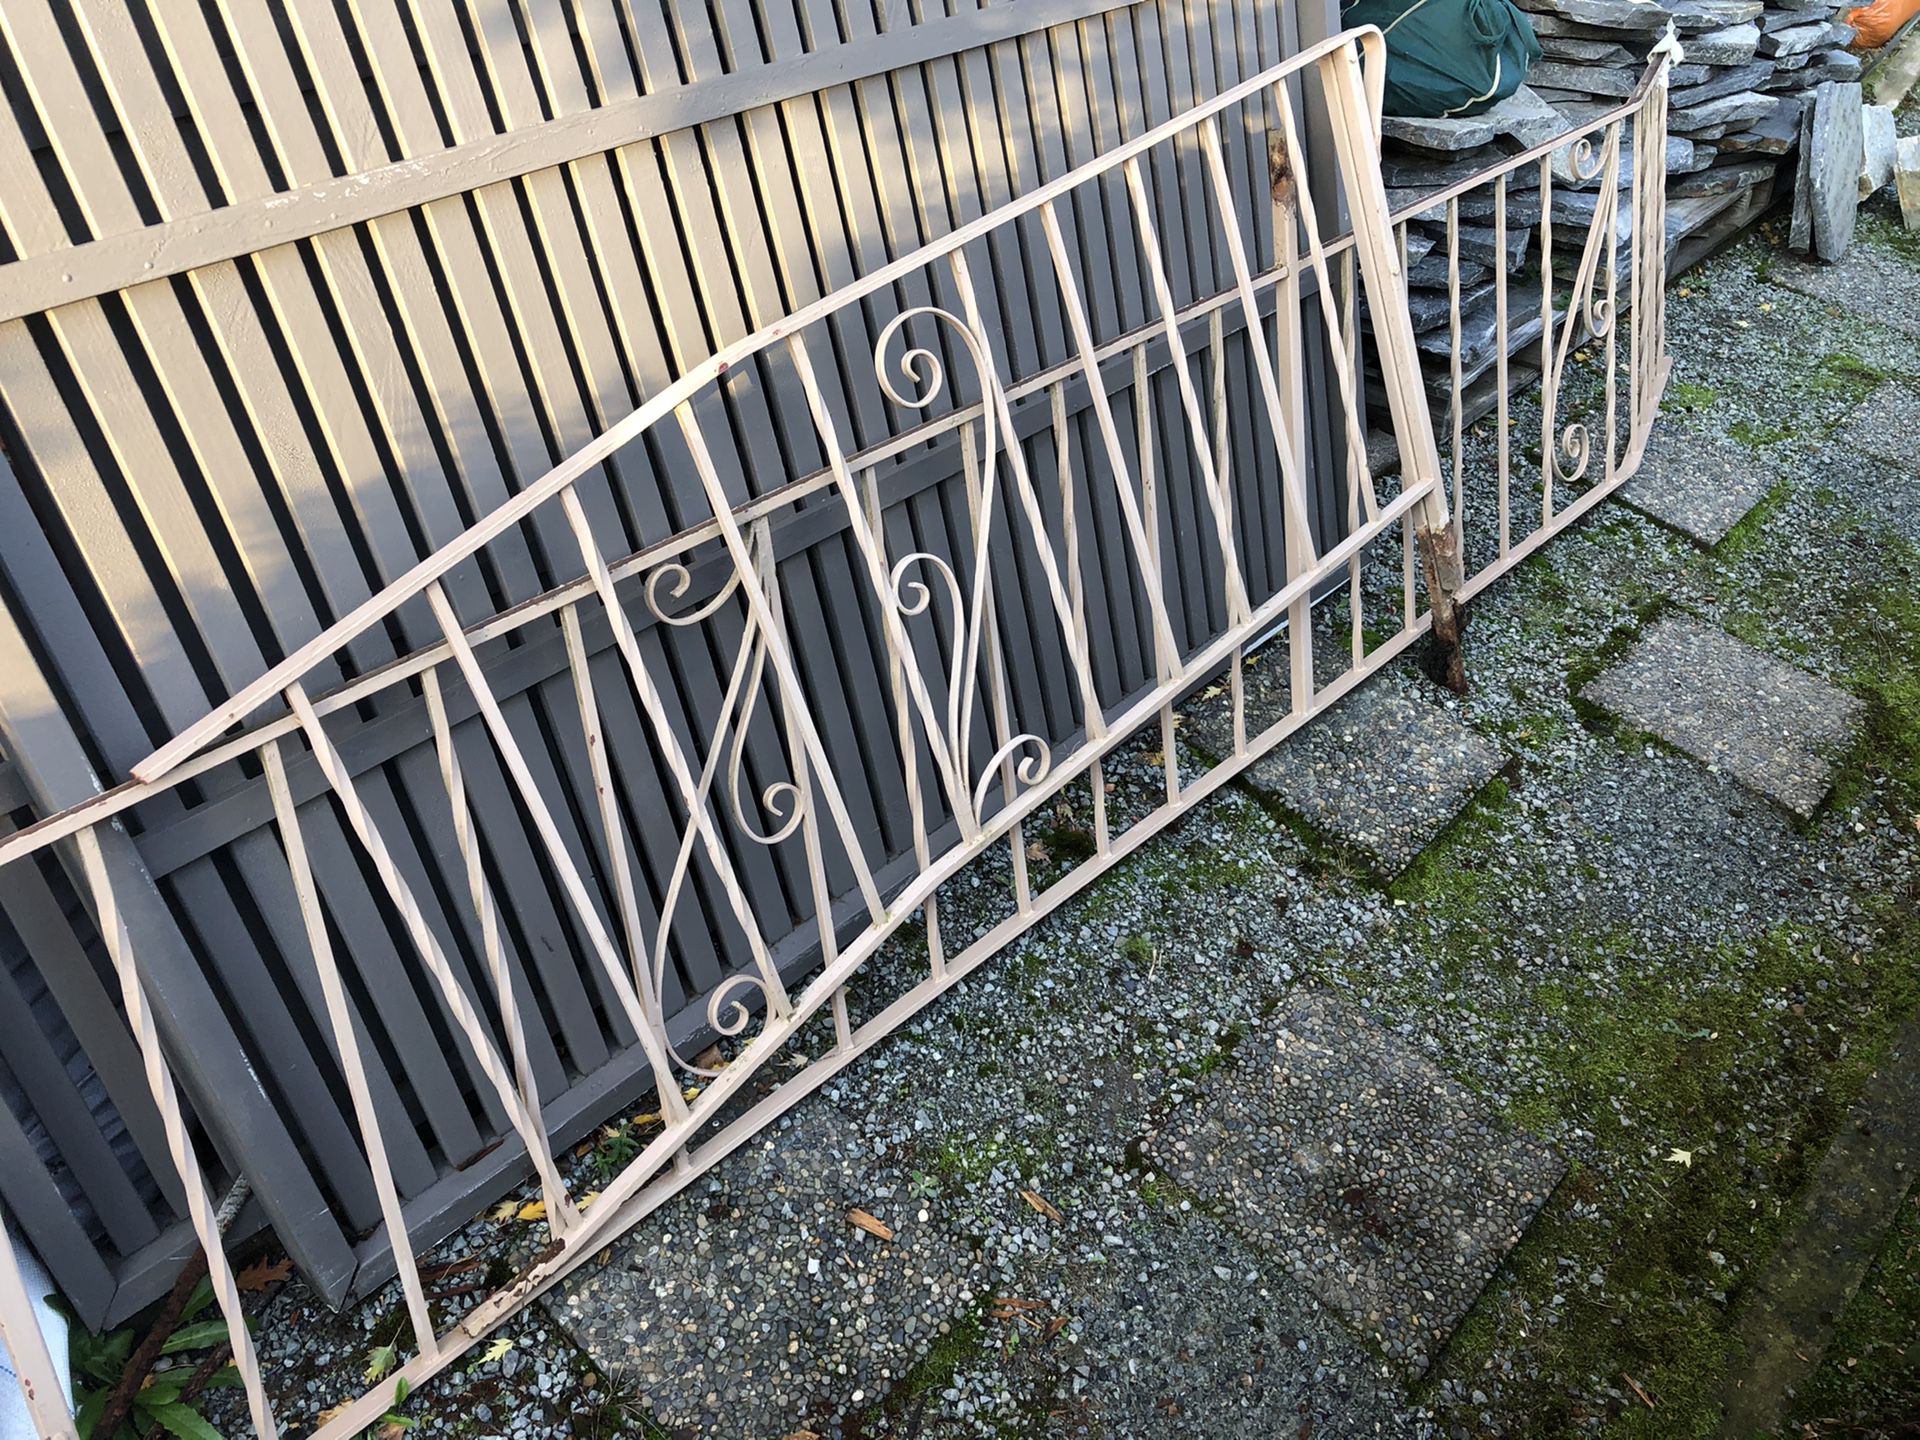 Free Wrought Iron Railings. First come first served. On street